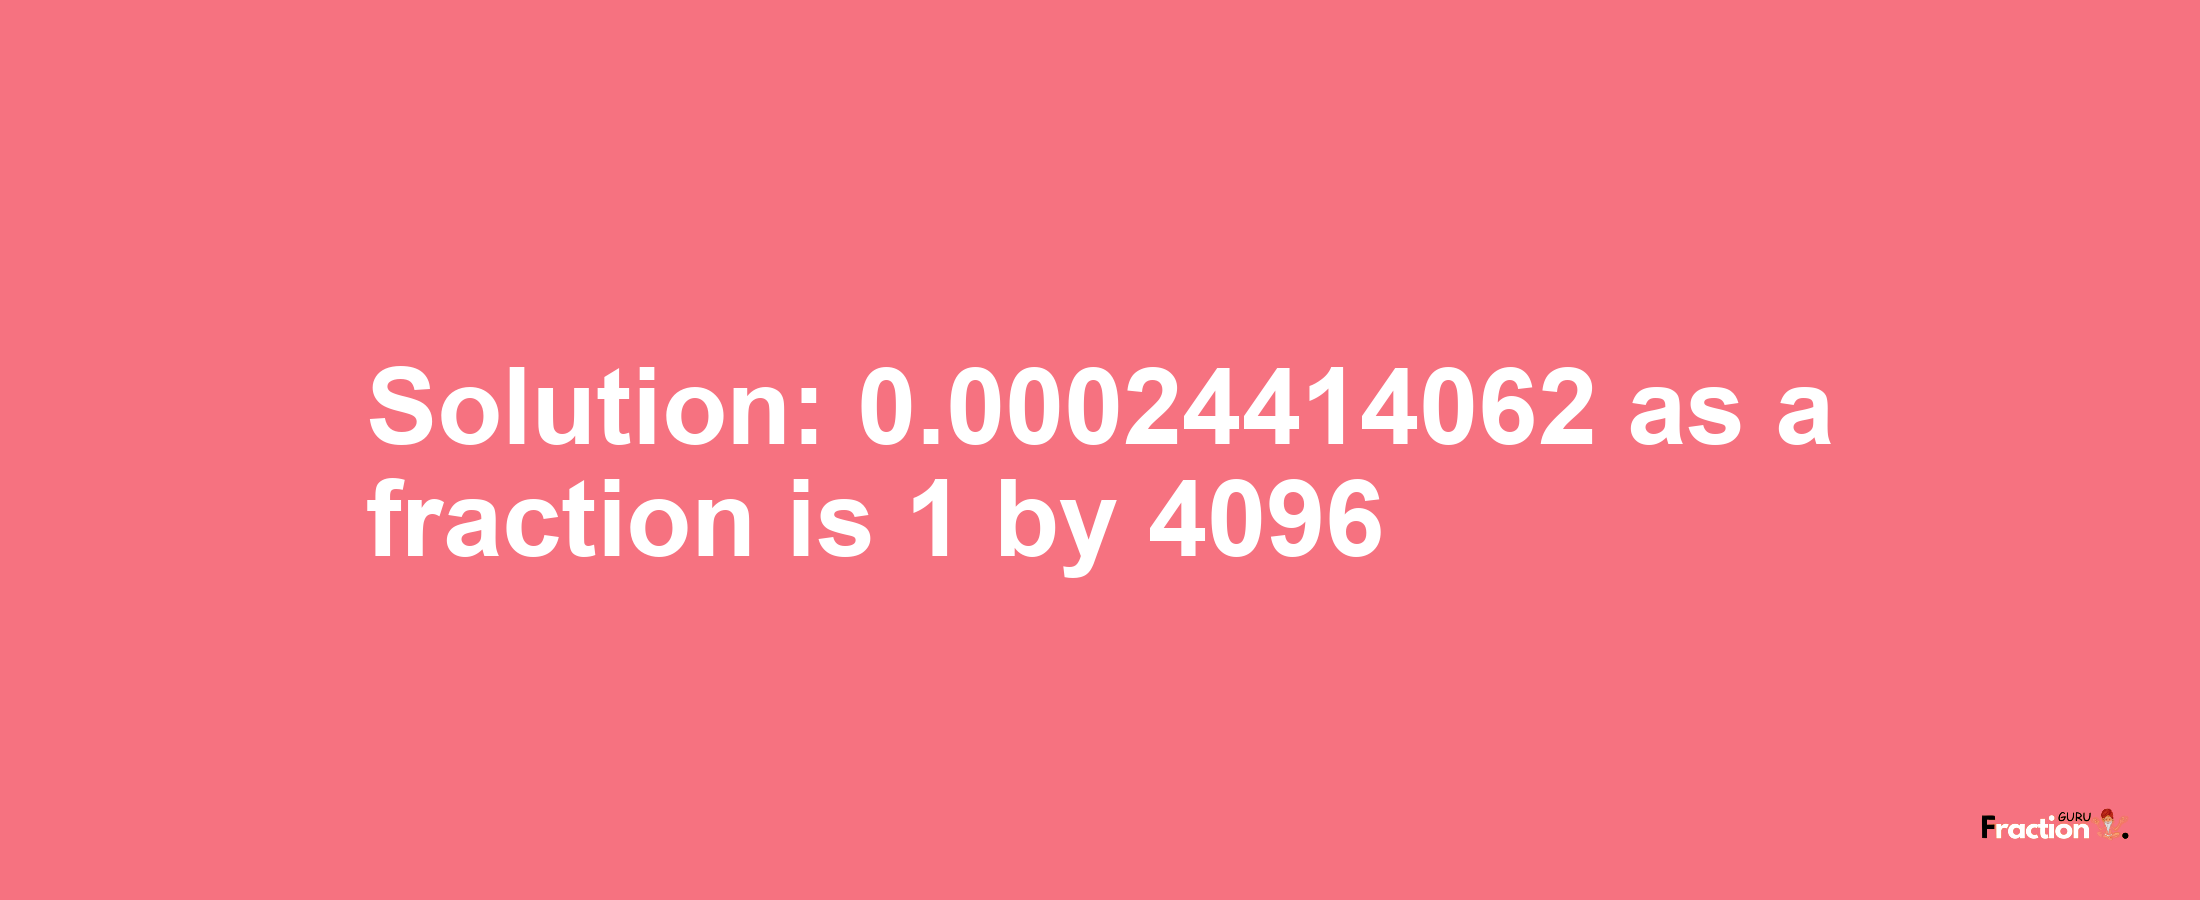 Solution:0.00024414062 as a fraction is 1/4096